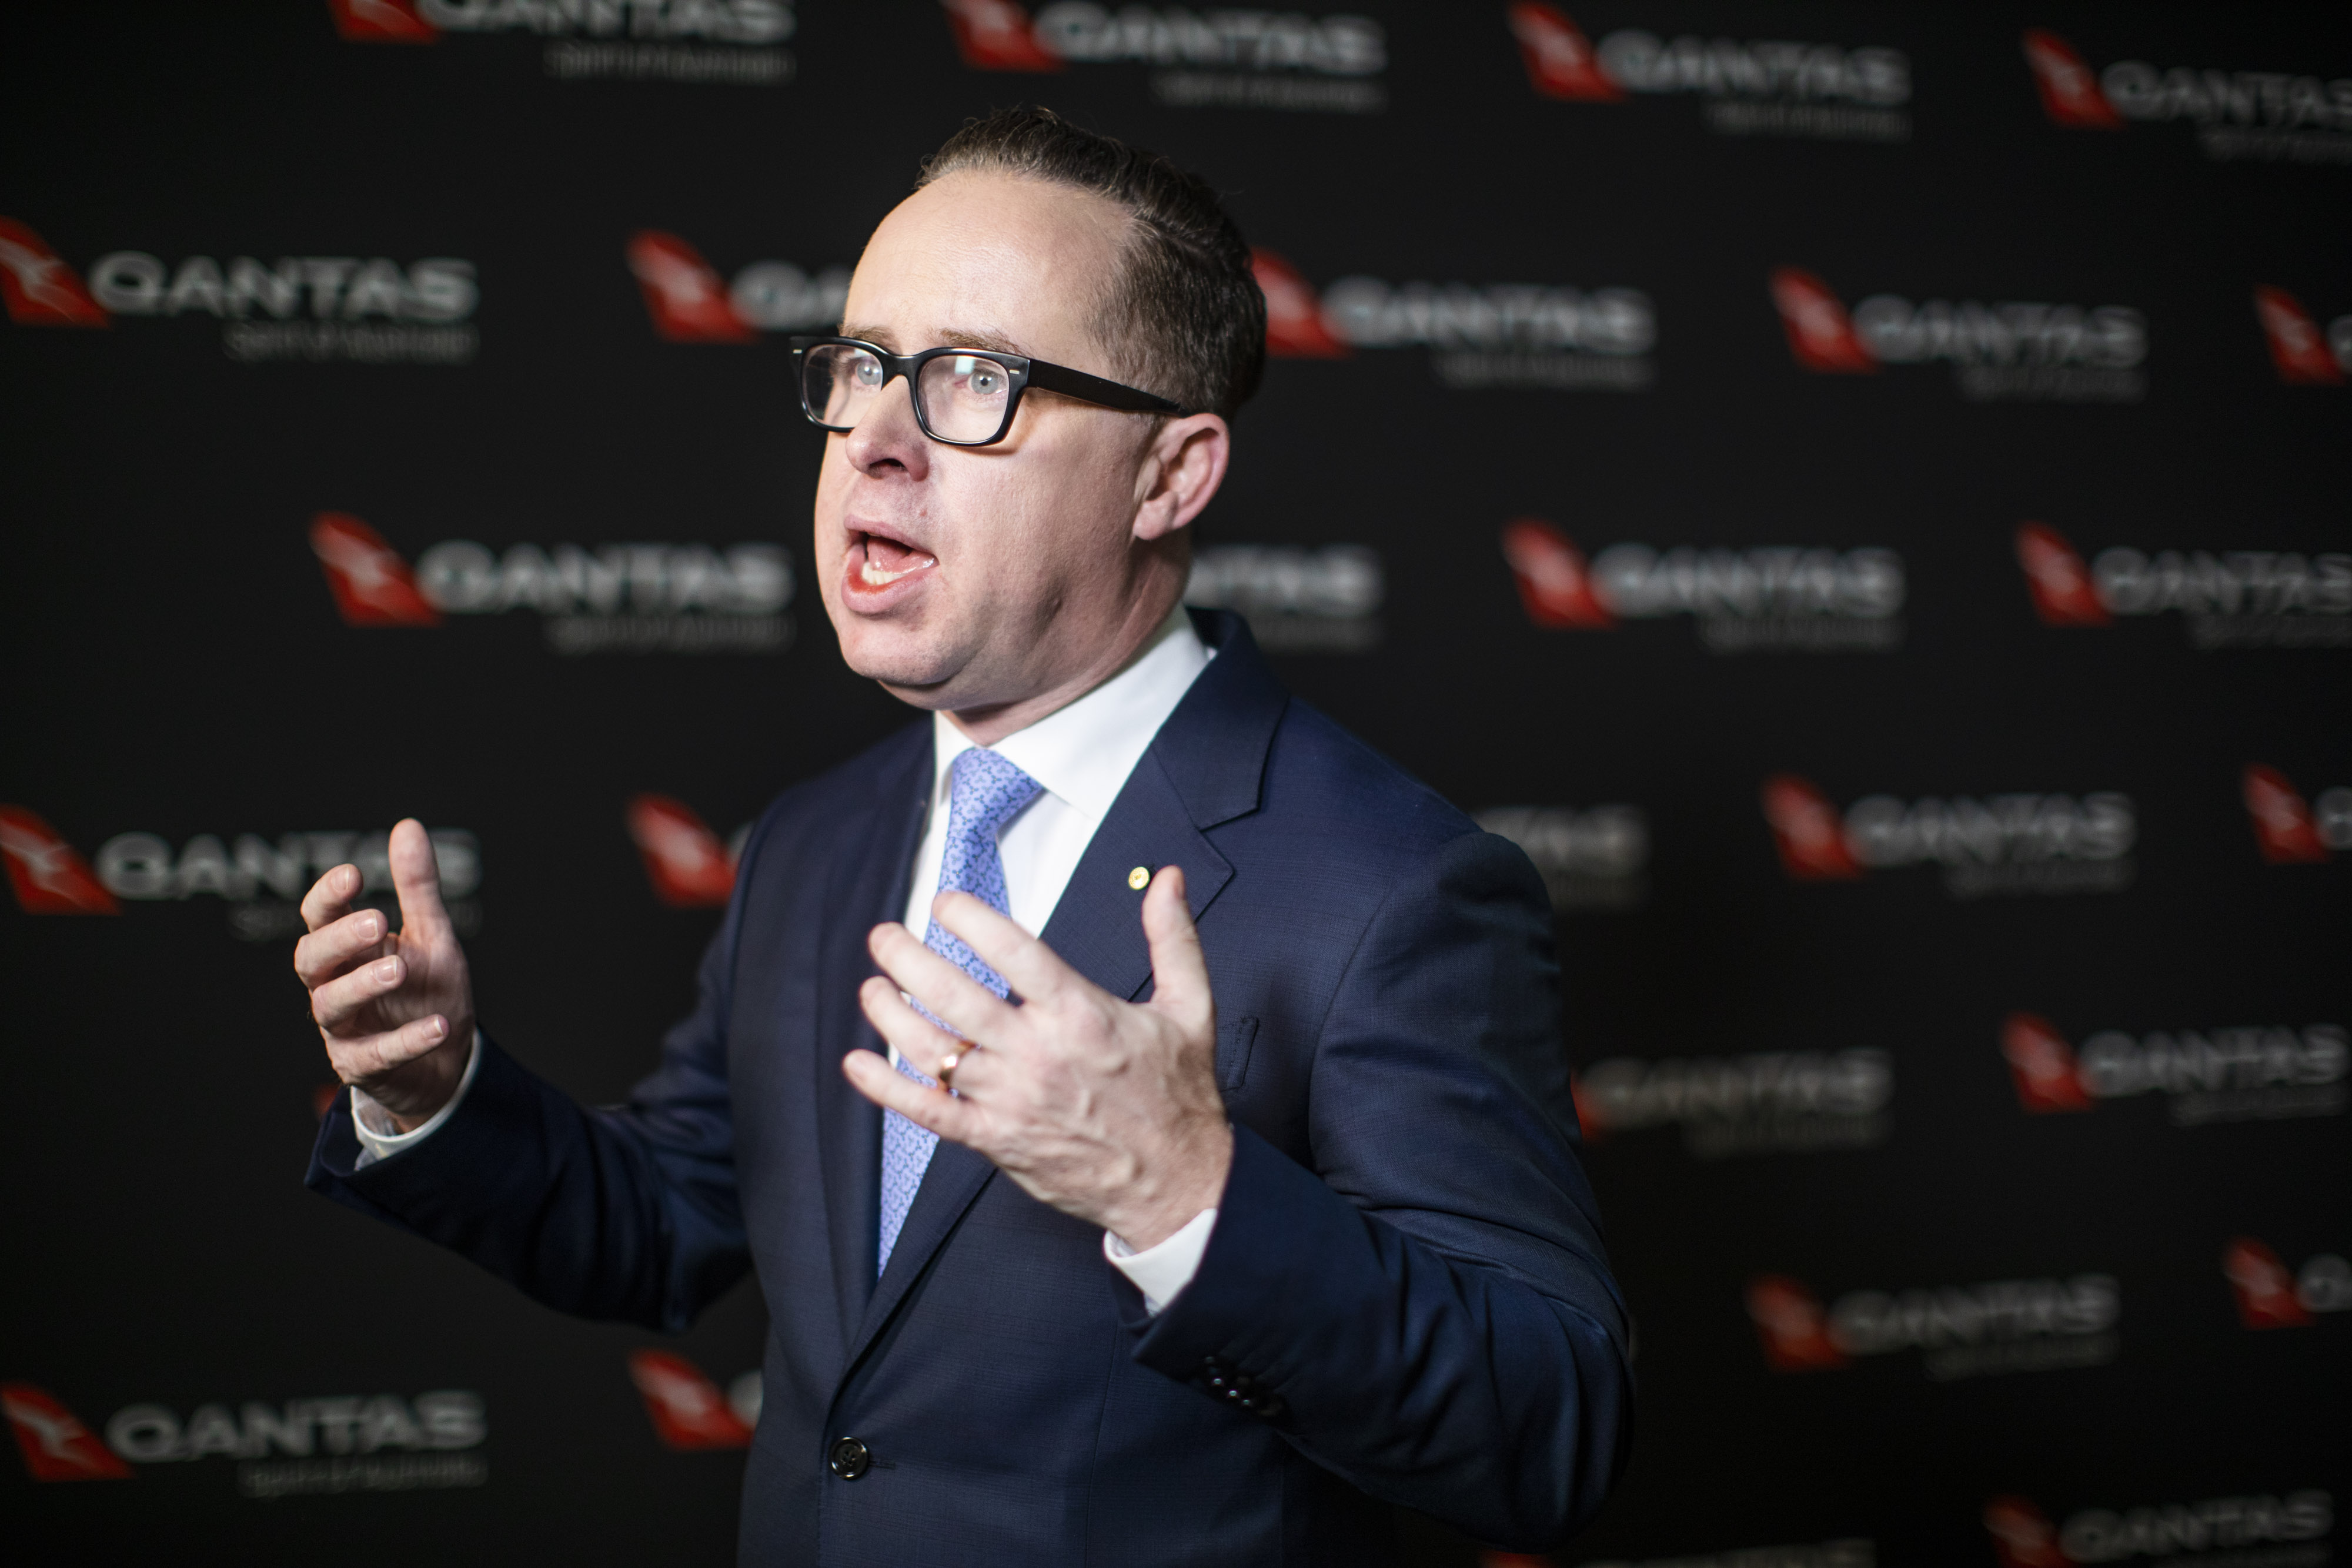 CEOs such as Qantas’s Alan Joyce are sharing the pain.